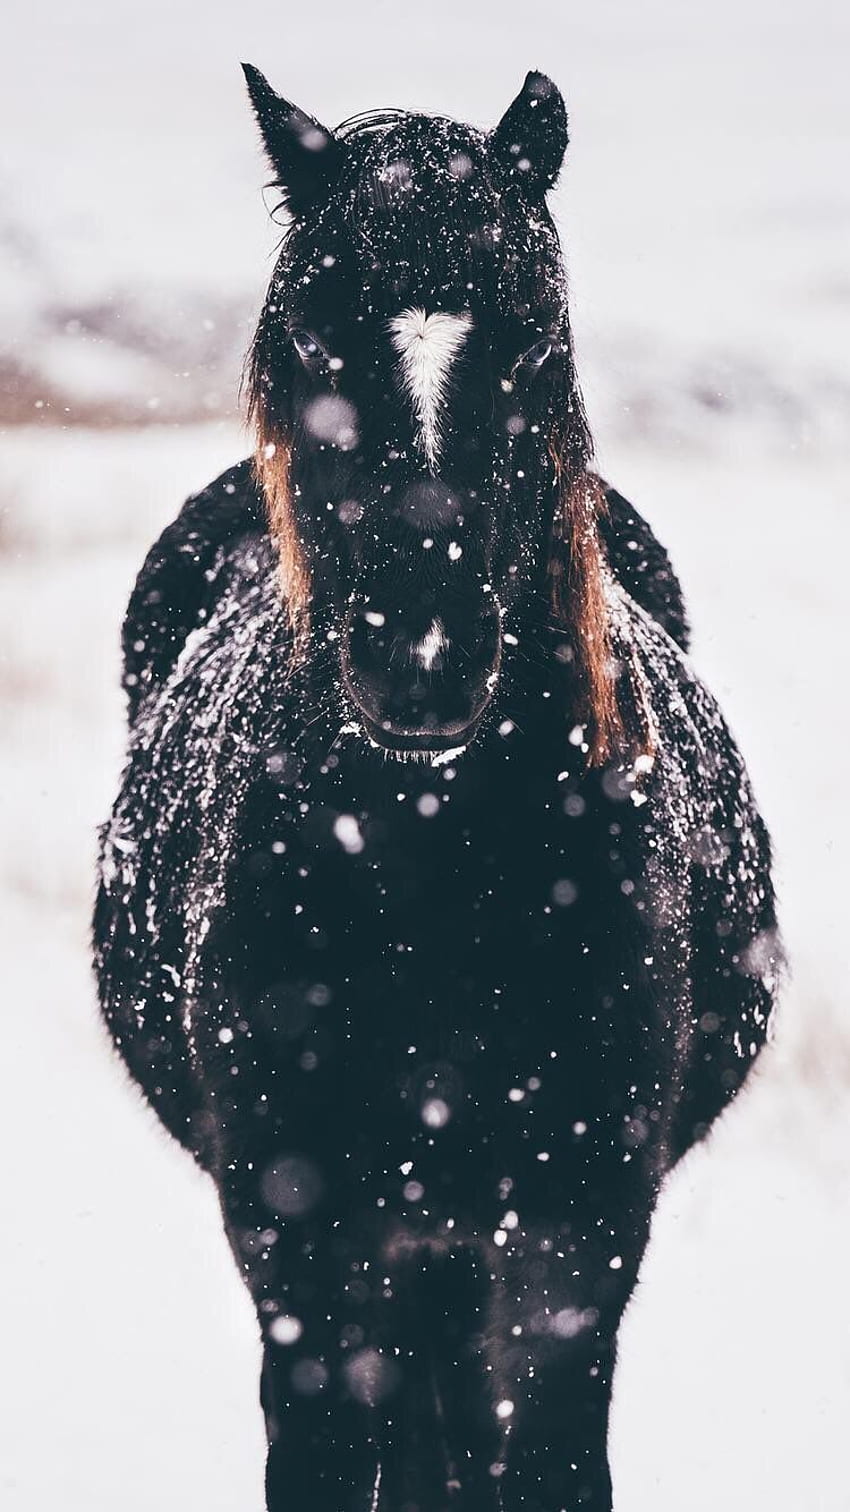 IPhone and Android : Horse in the Snow for iPhone and Android ...